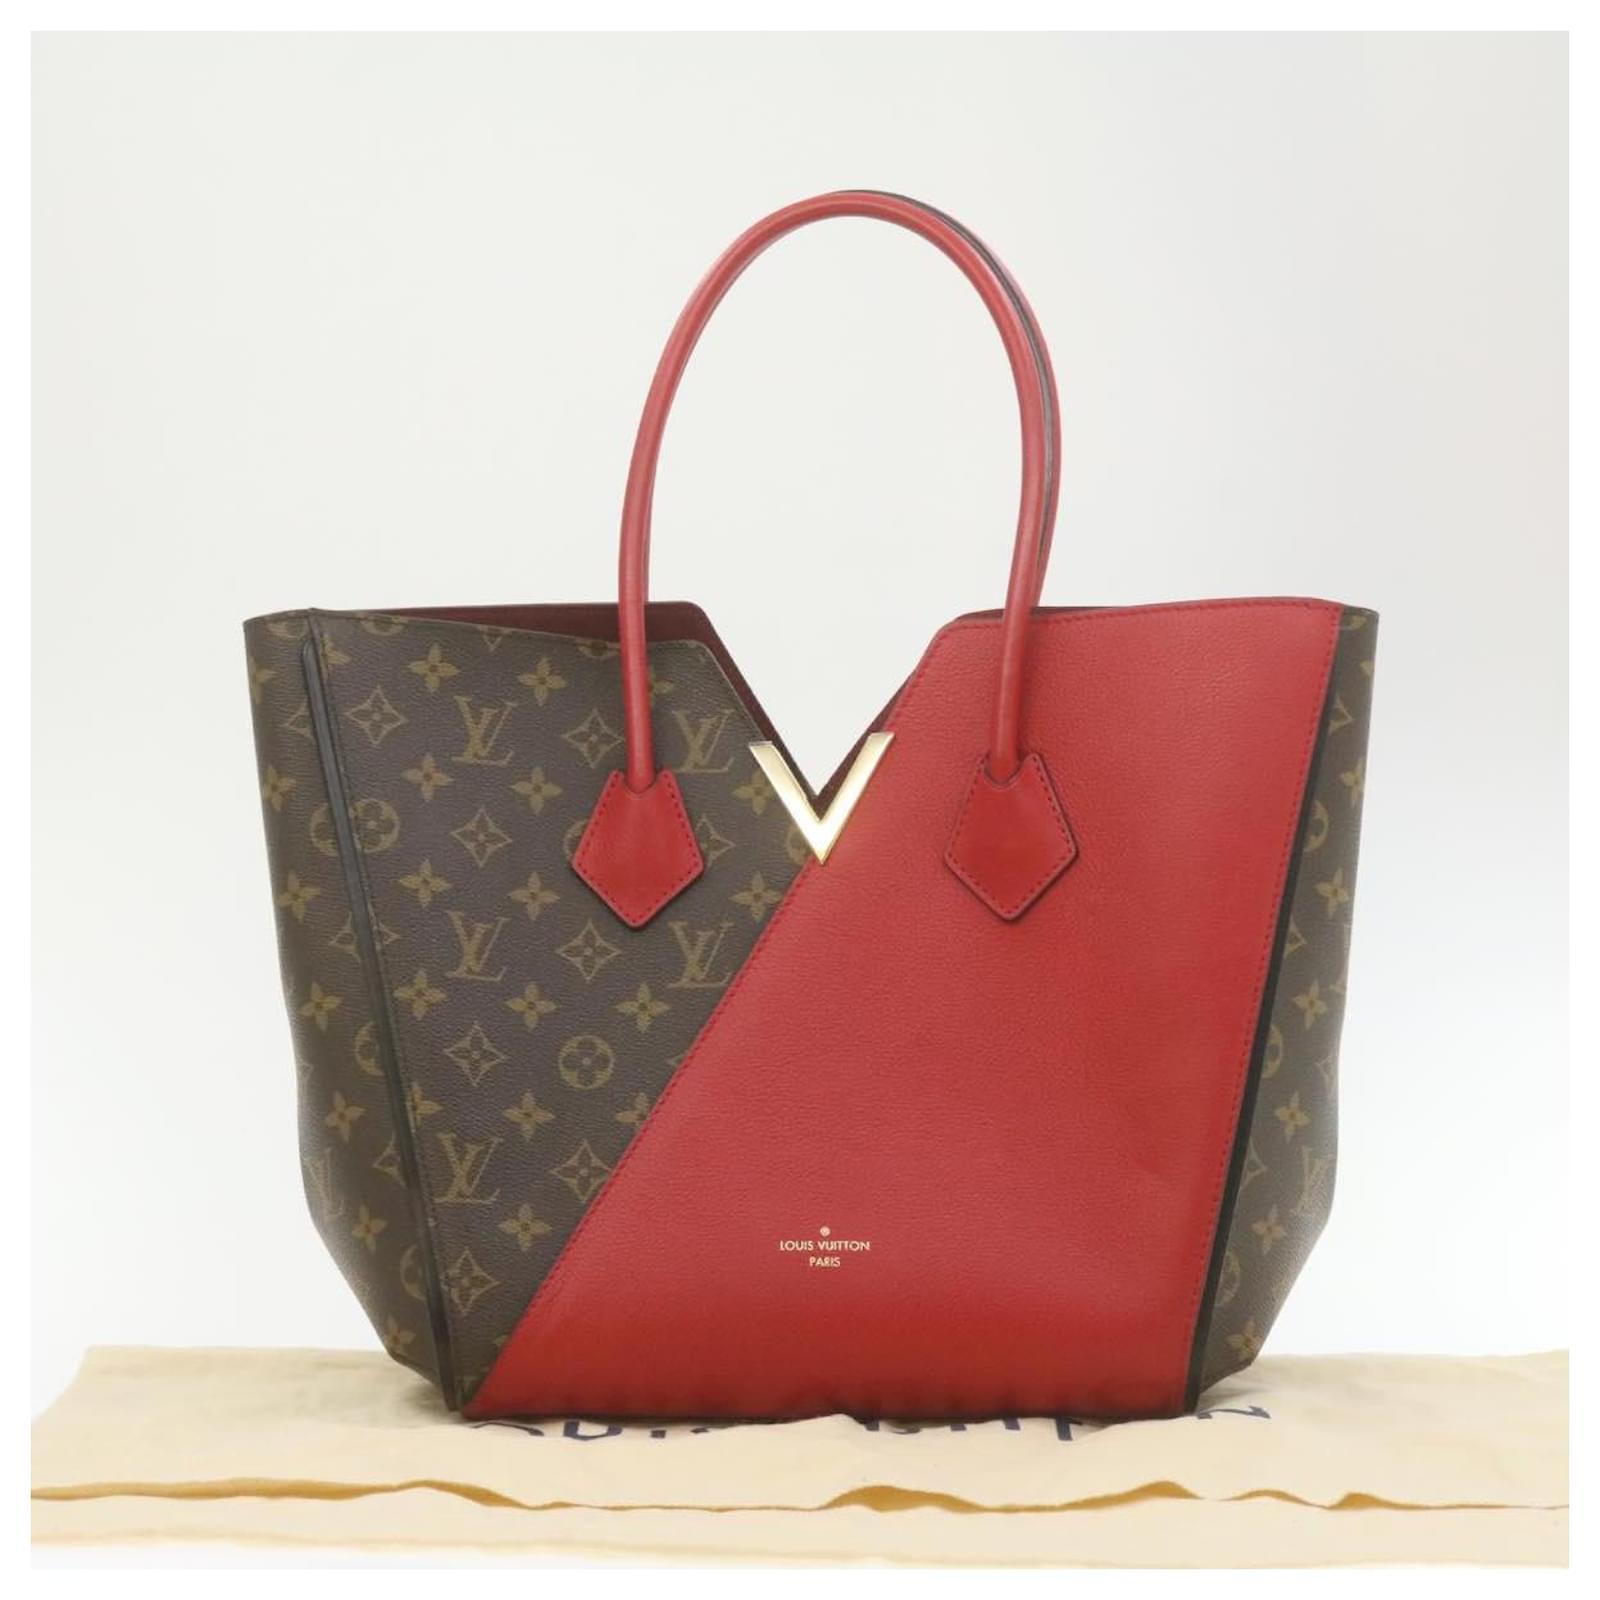 LOUIS VUITTON LOUIS VUITTON Kimono MM Tote Bag M40459 Monogram canvas Red  Used M40459｜Product Code：2101216608665｜BRAND OFF Online Store